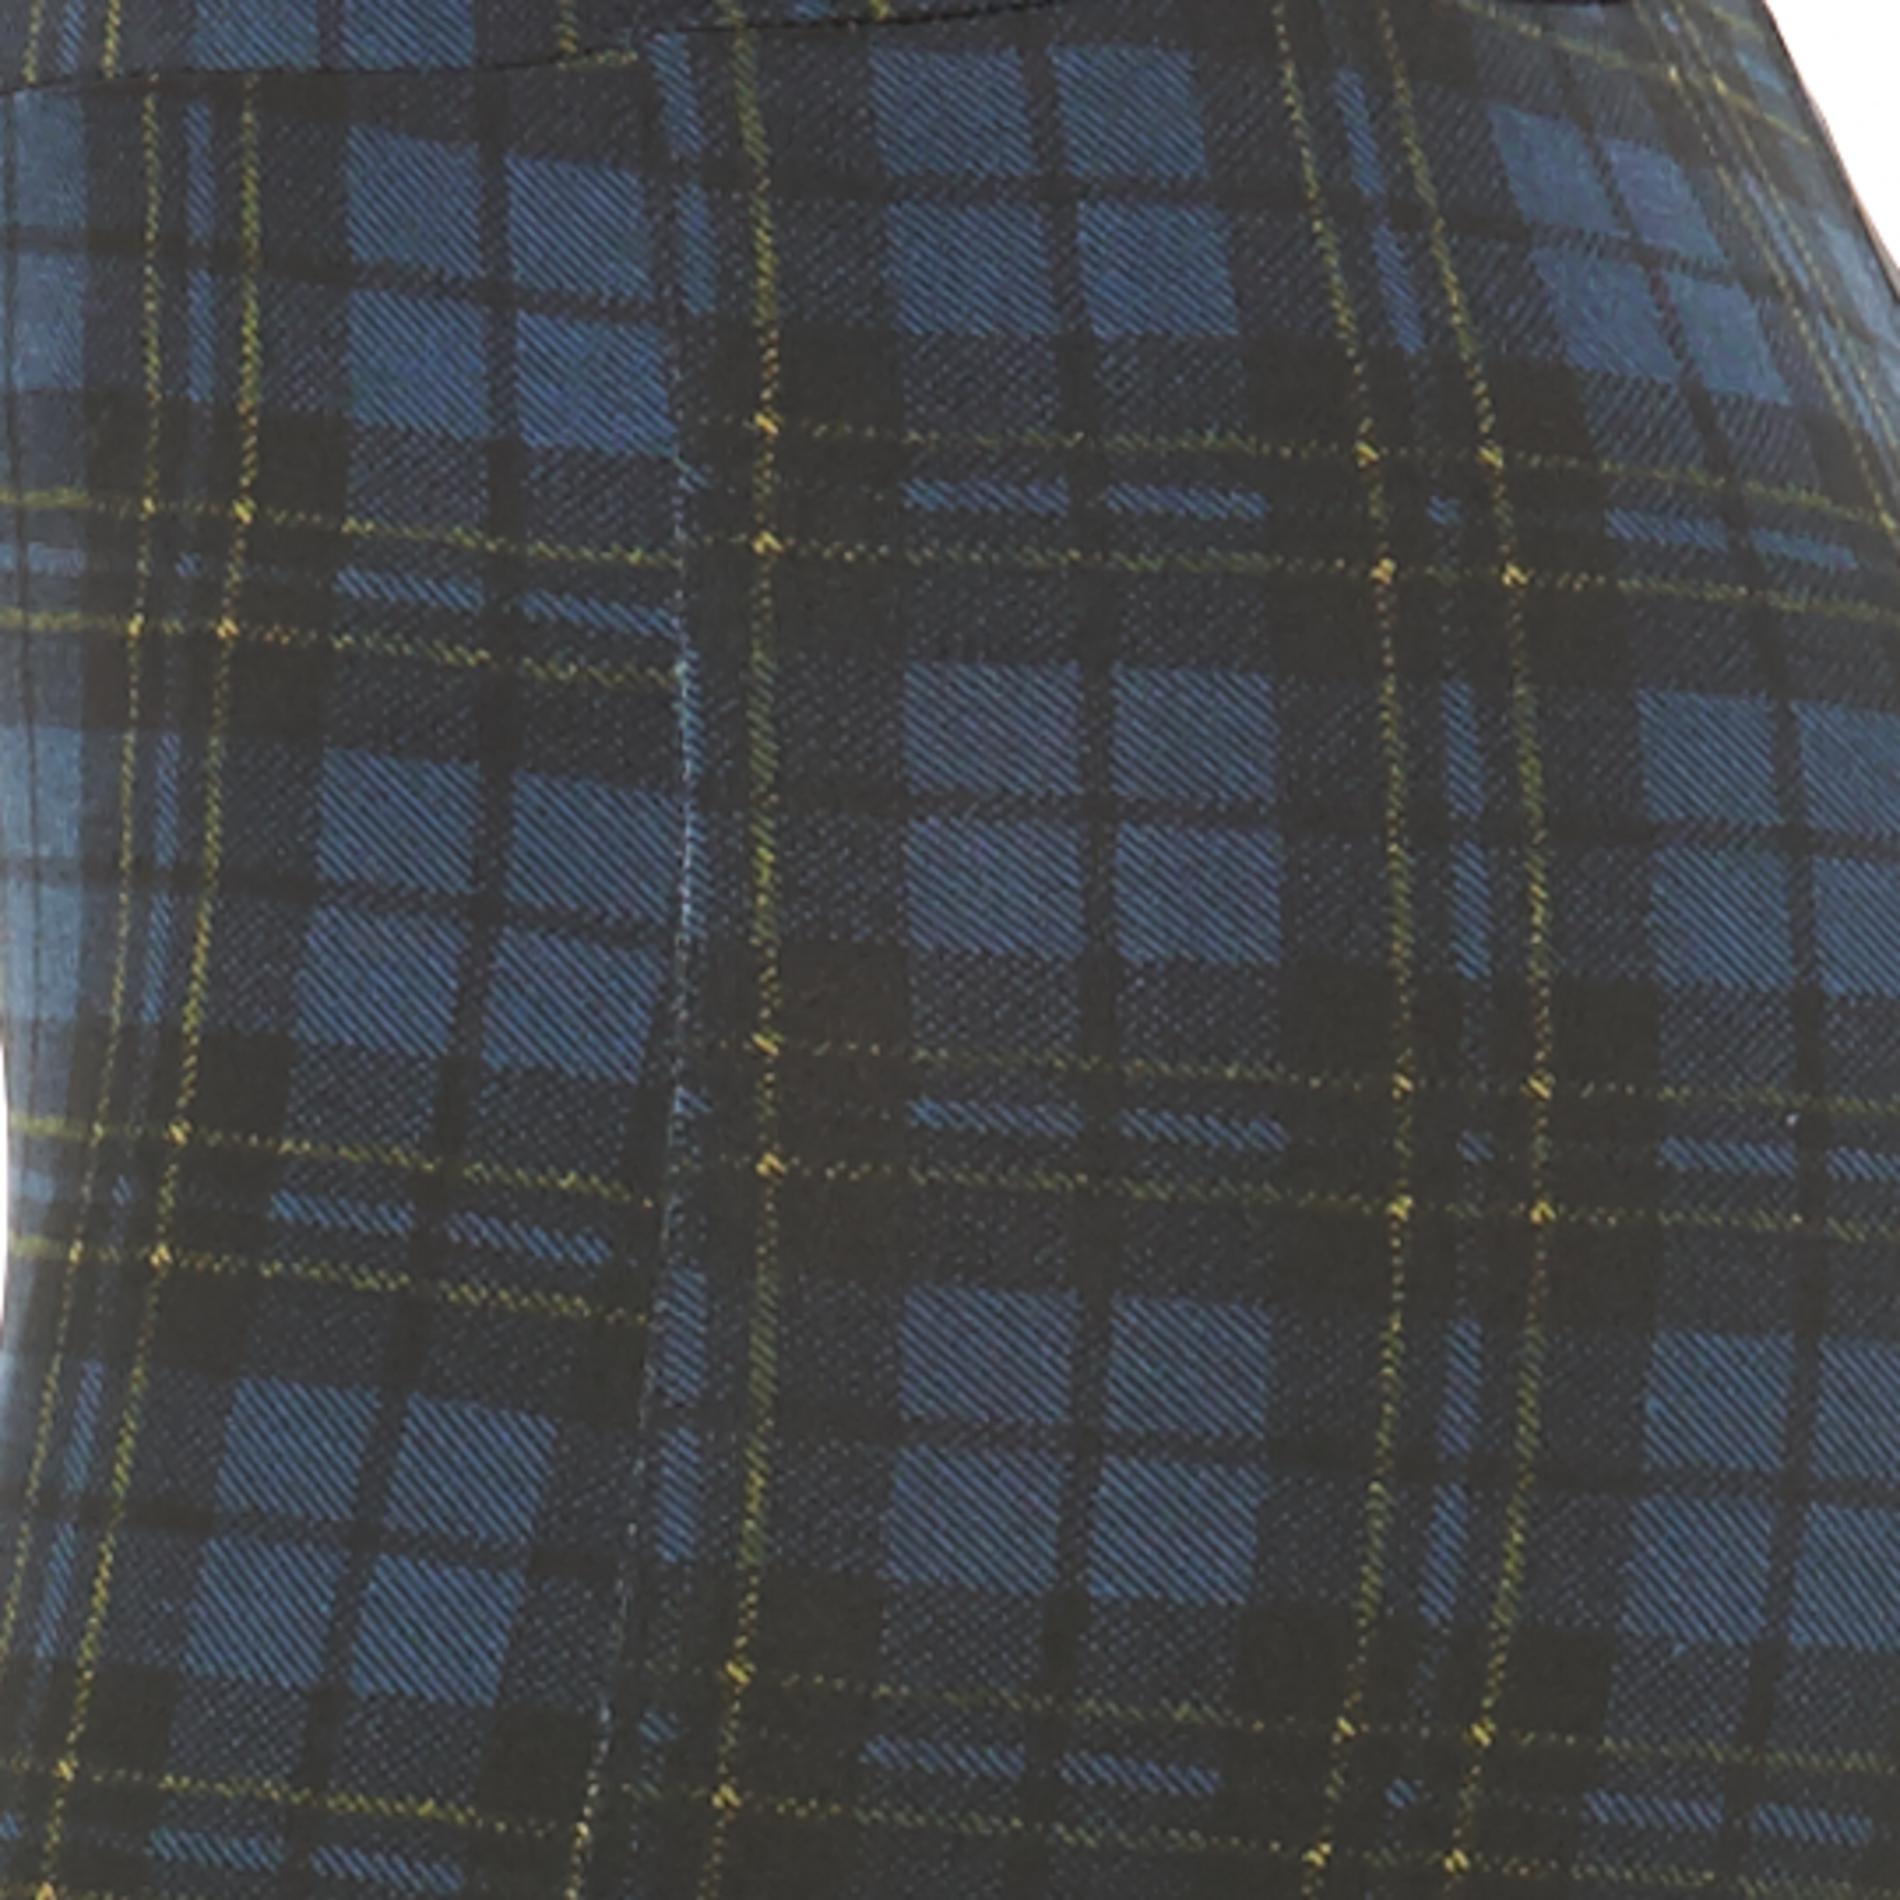 Selected Color is Navy Lone Plaid Print